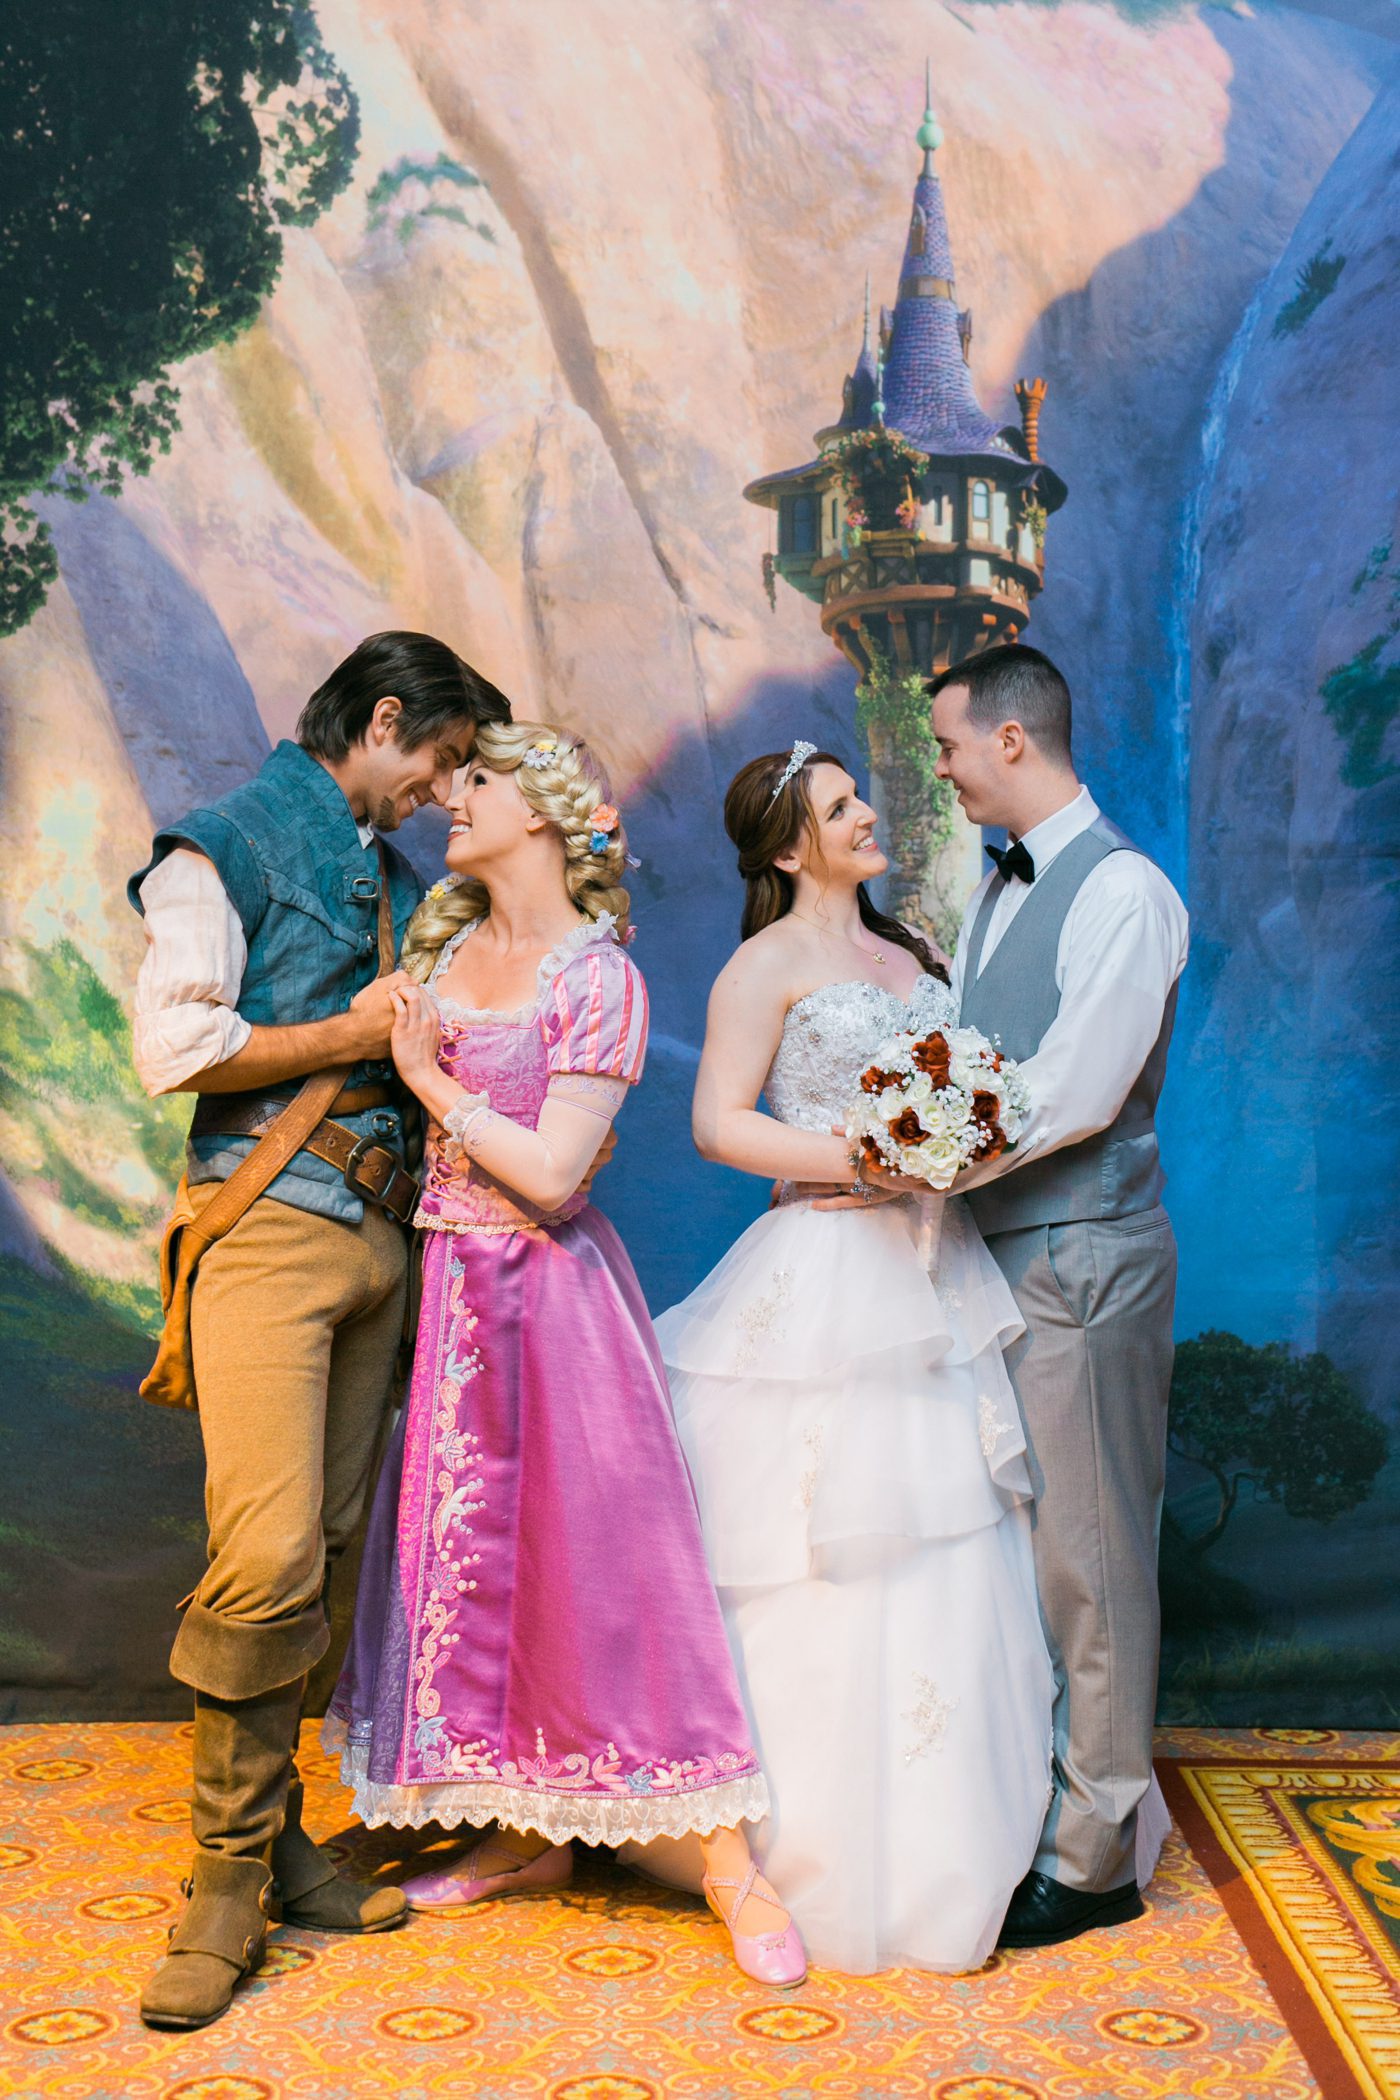 Tangled themed wedding at Disney World by Catherine Ann Photography